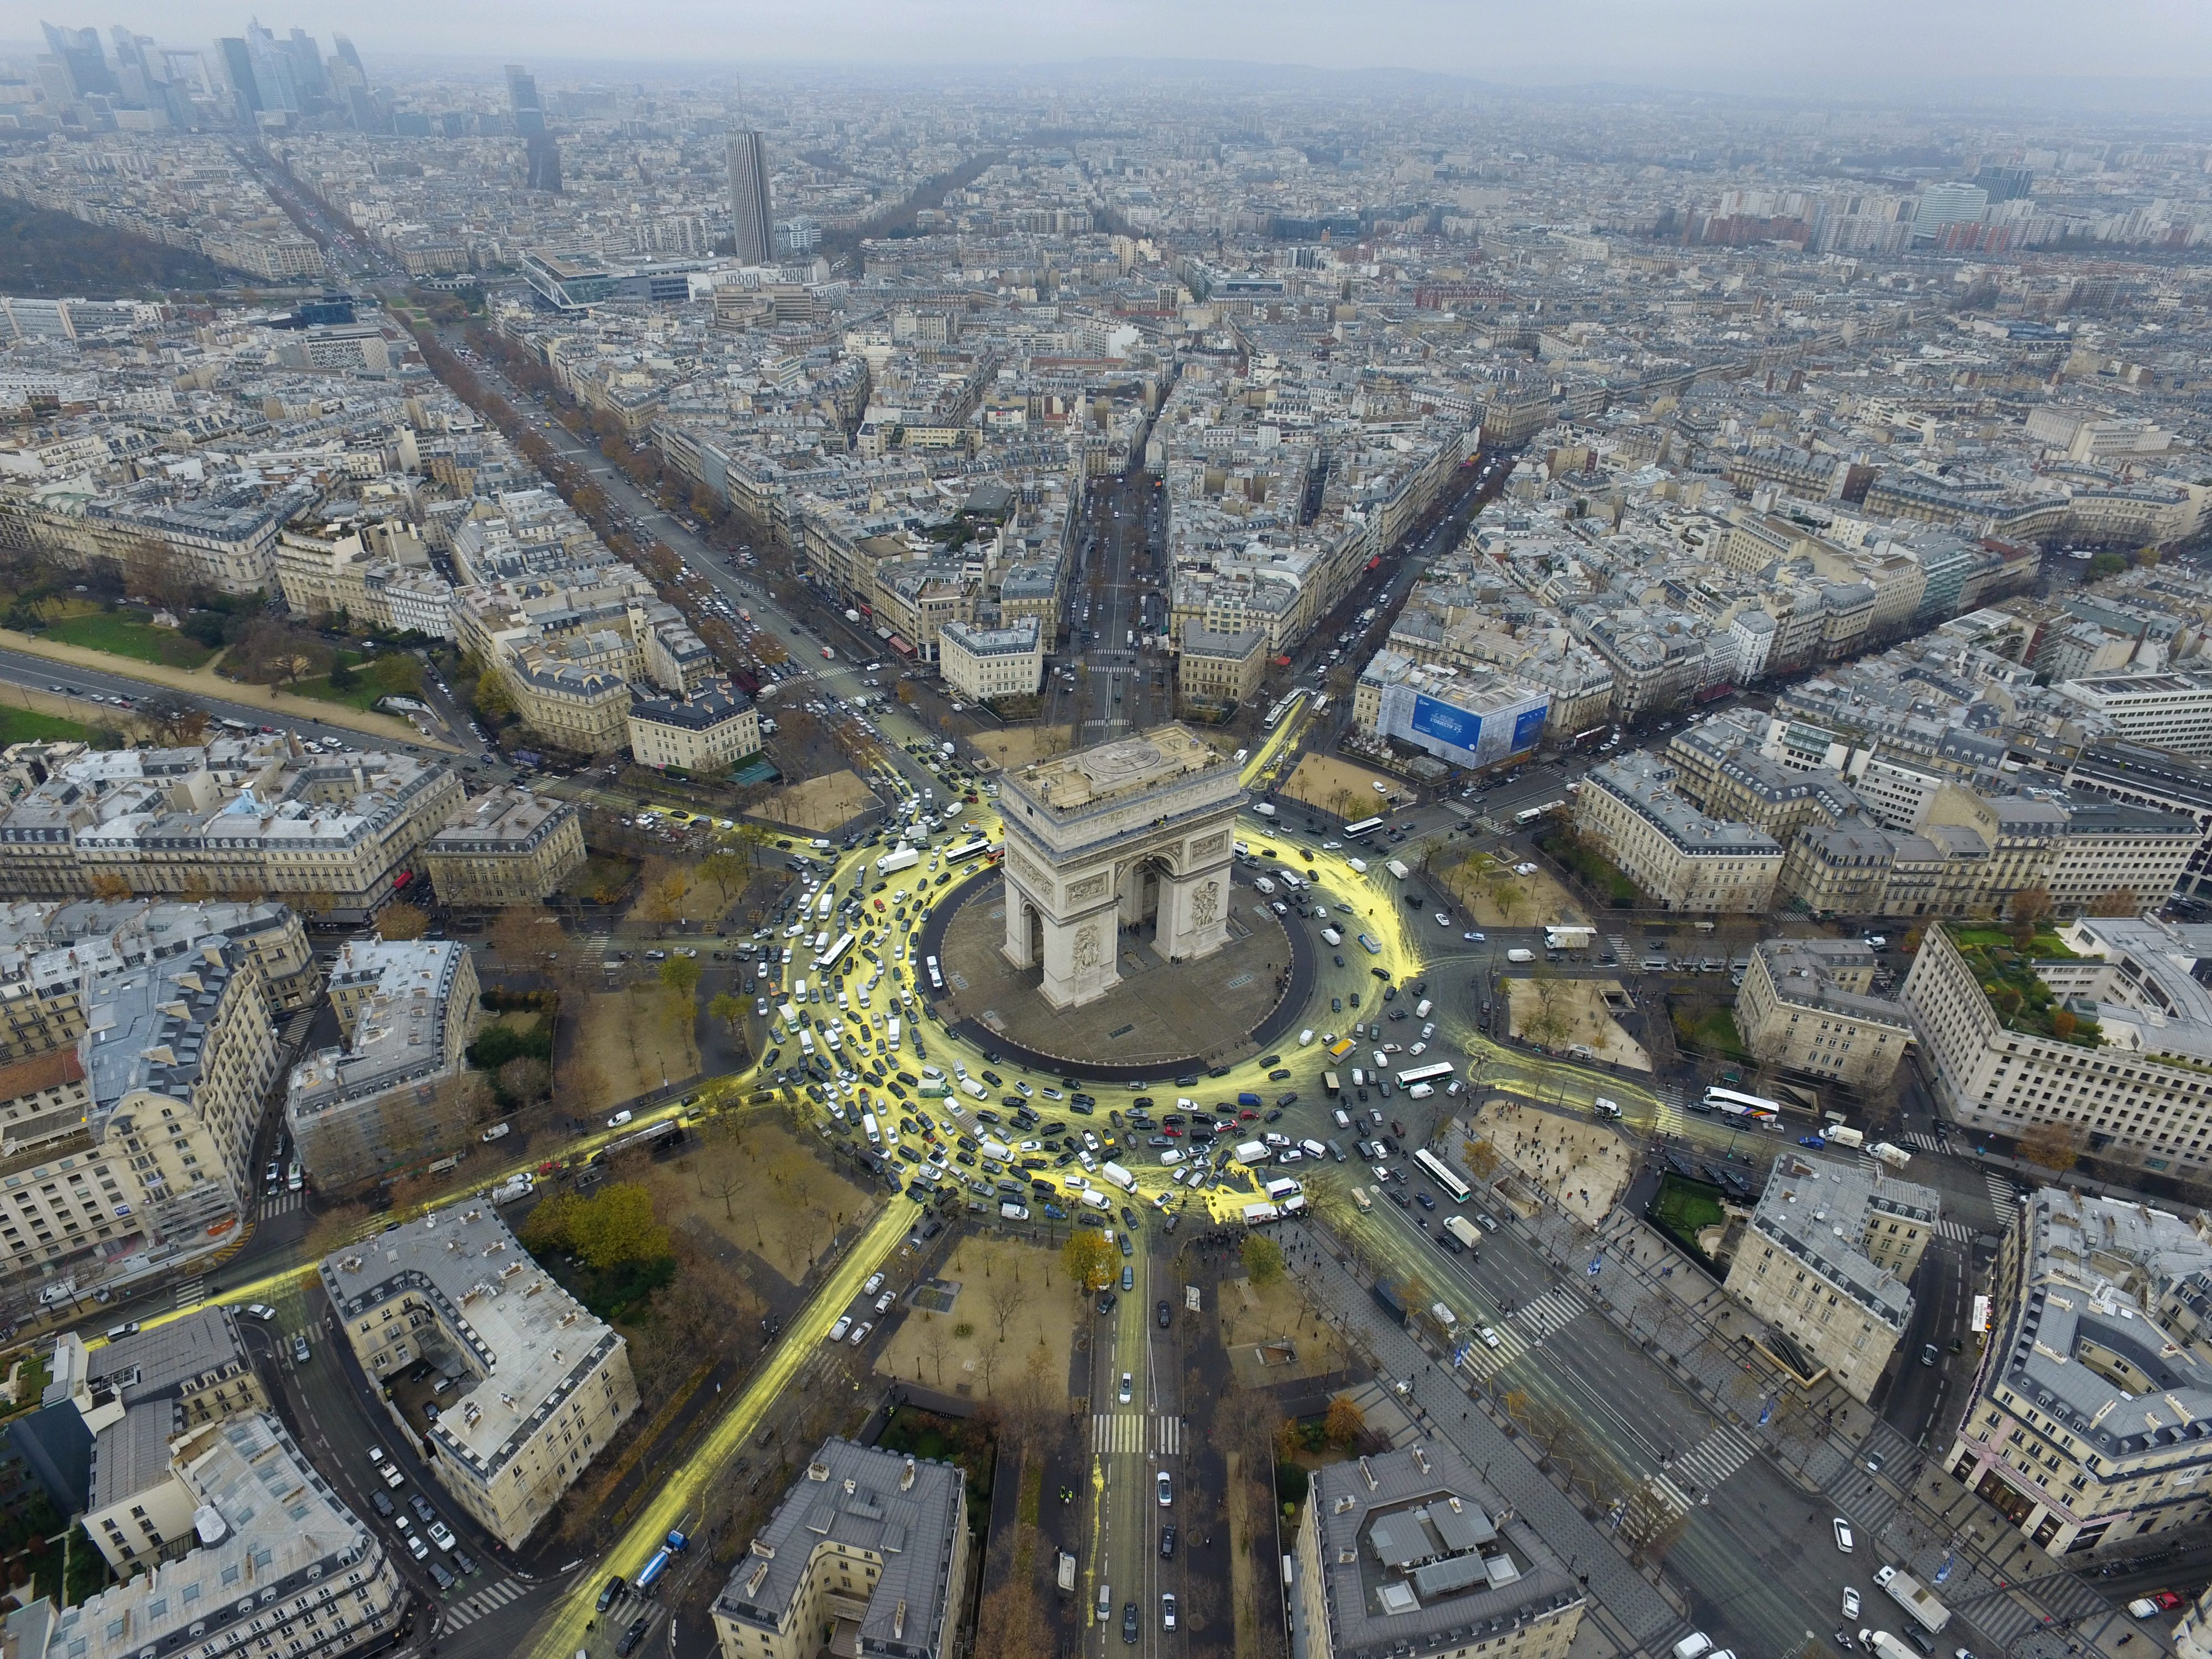 TRIUMPH? A handout picture provided by the environment protection organization 'Greenpeace' on 11 December 2015 shows an aerial view of a Greenpeace protest at the Place de L'Etoile during the COP21 World Climate Change Conference 2015, in Paris, France, 11 December 2015. About 50 activits tried to draw a yellow sun around the landmark 'Arc de Triomphe' monument. Launched by a historic gathering of world leaders, seen at mid-point as bringing the world closer than ever to a global deal, the COP21 climate summit has at times seemed nothing short of auspicious. EPA/GREENPEACE  